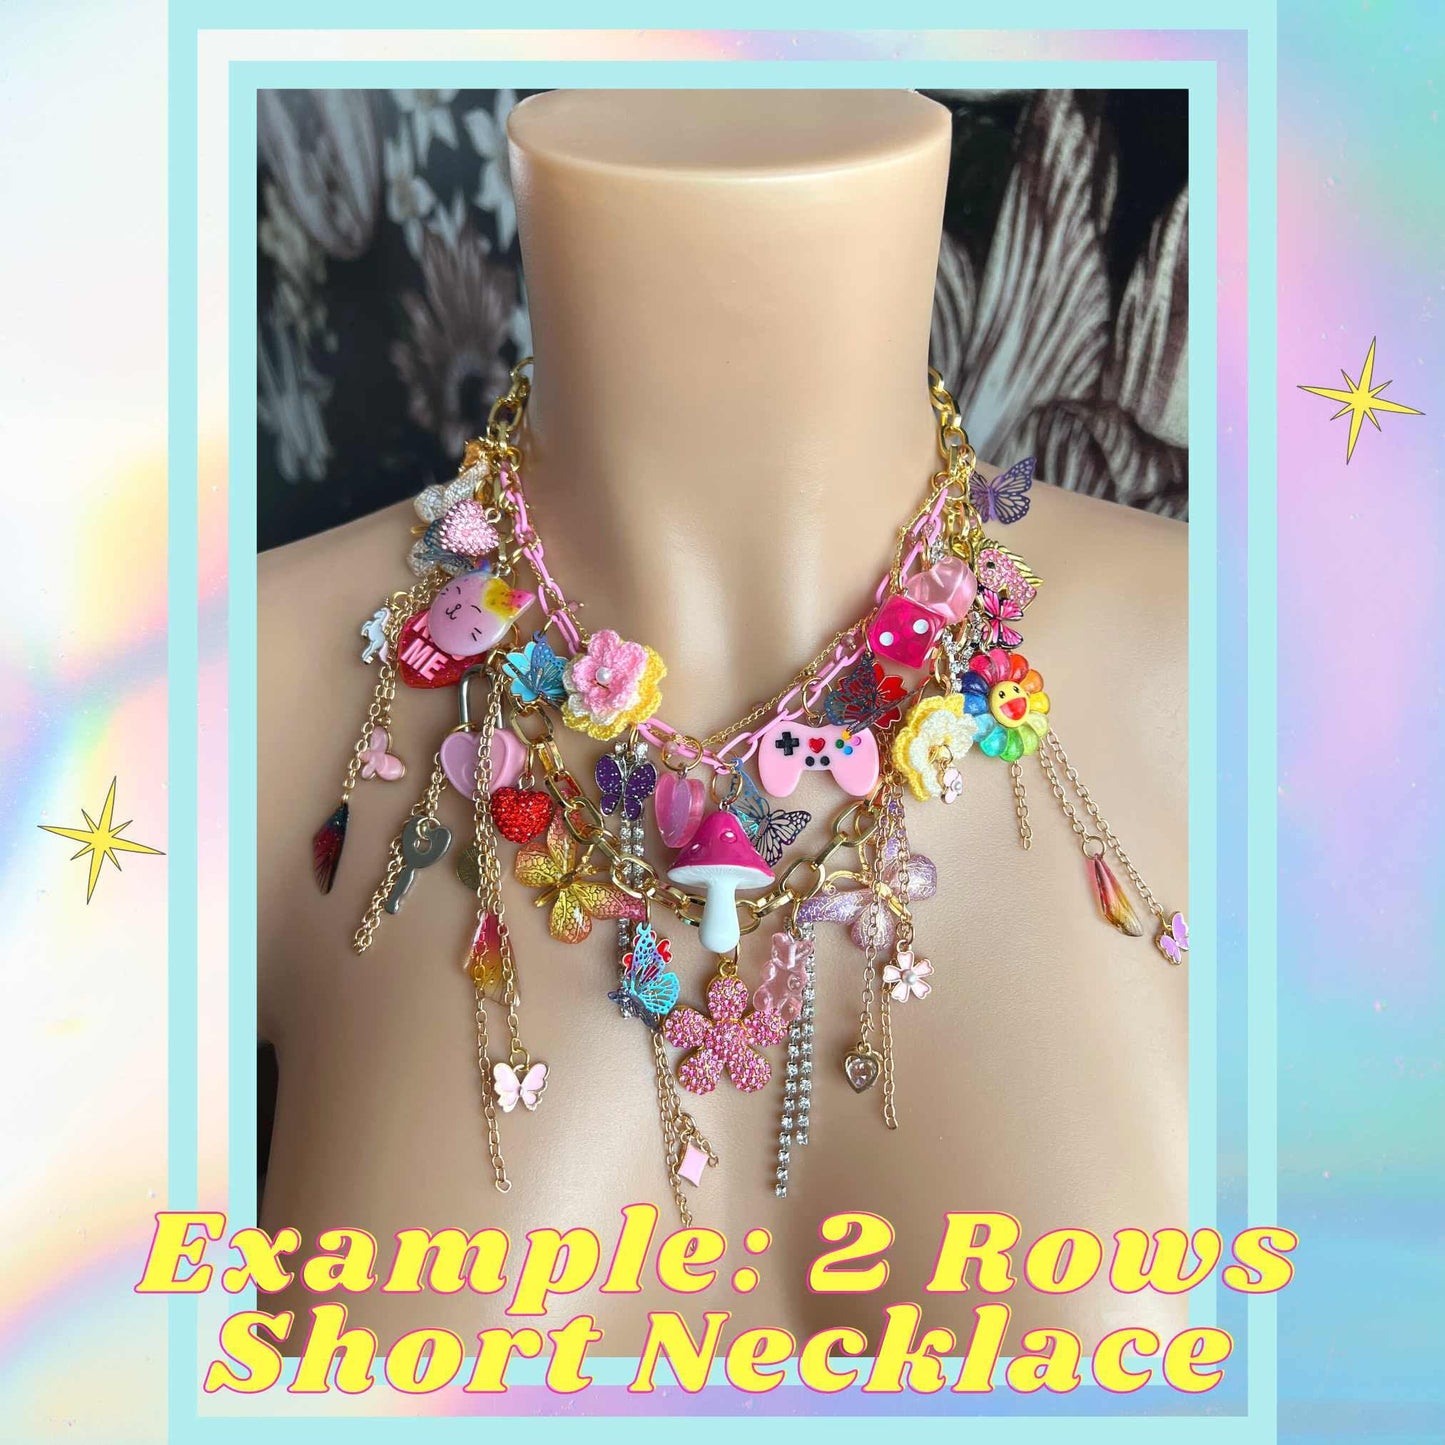 Rainbow Charm Layered Necklace Set Custom Order Request Personalized Jewelry Y2k Necklace Rave Mushroom Charms Personalized Necklace Boho